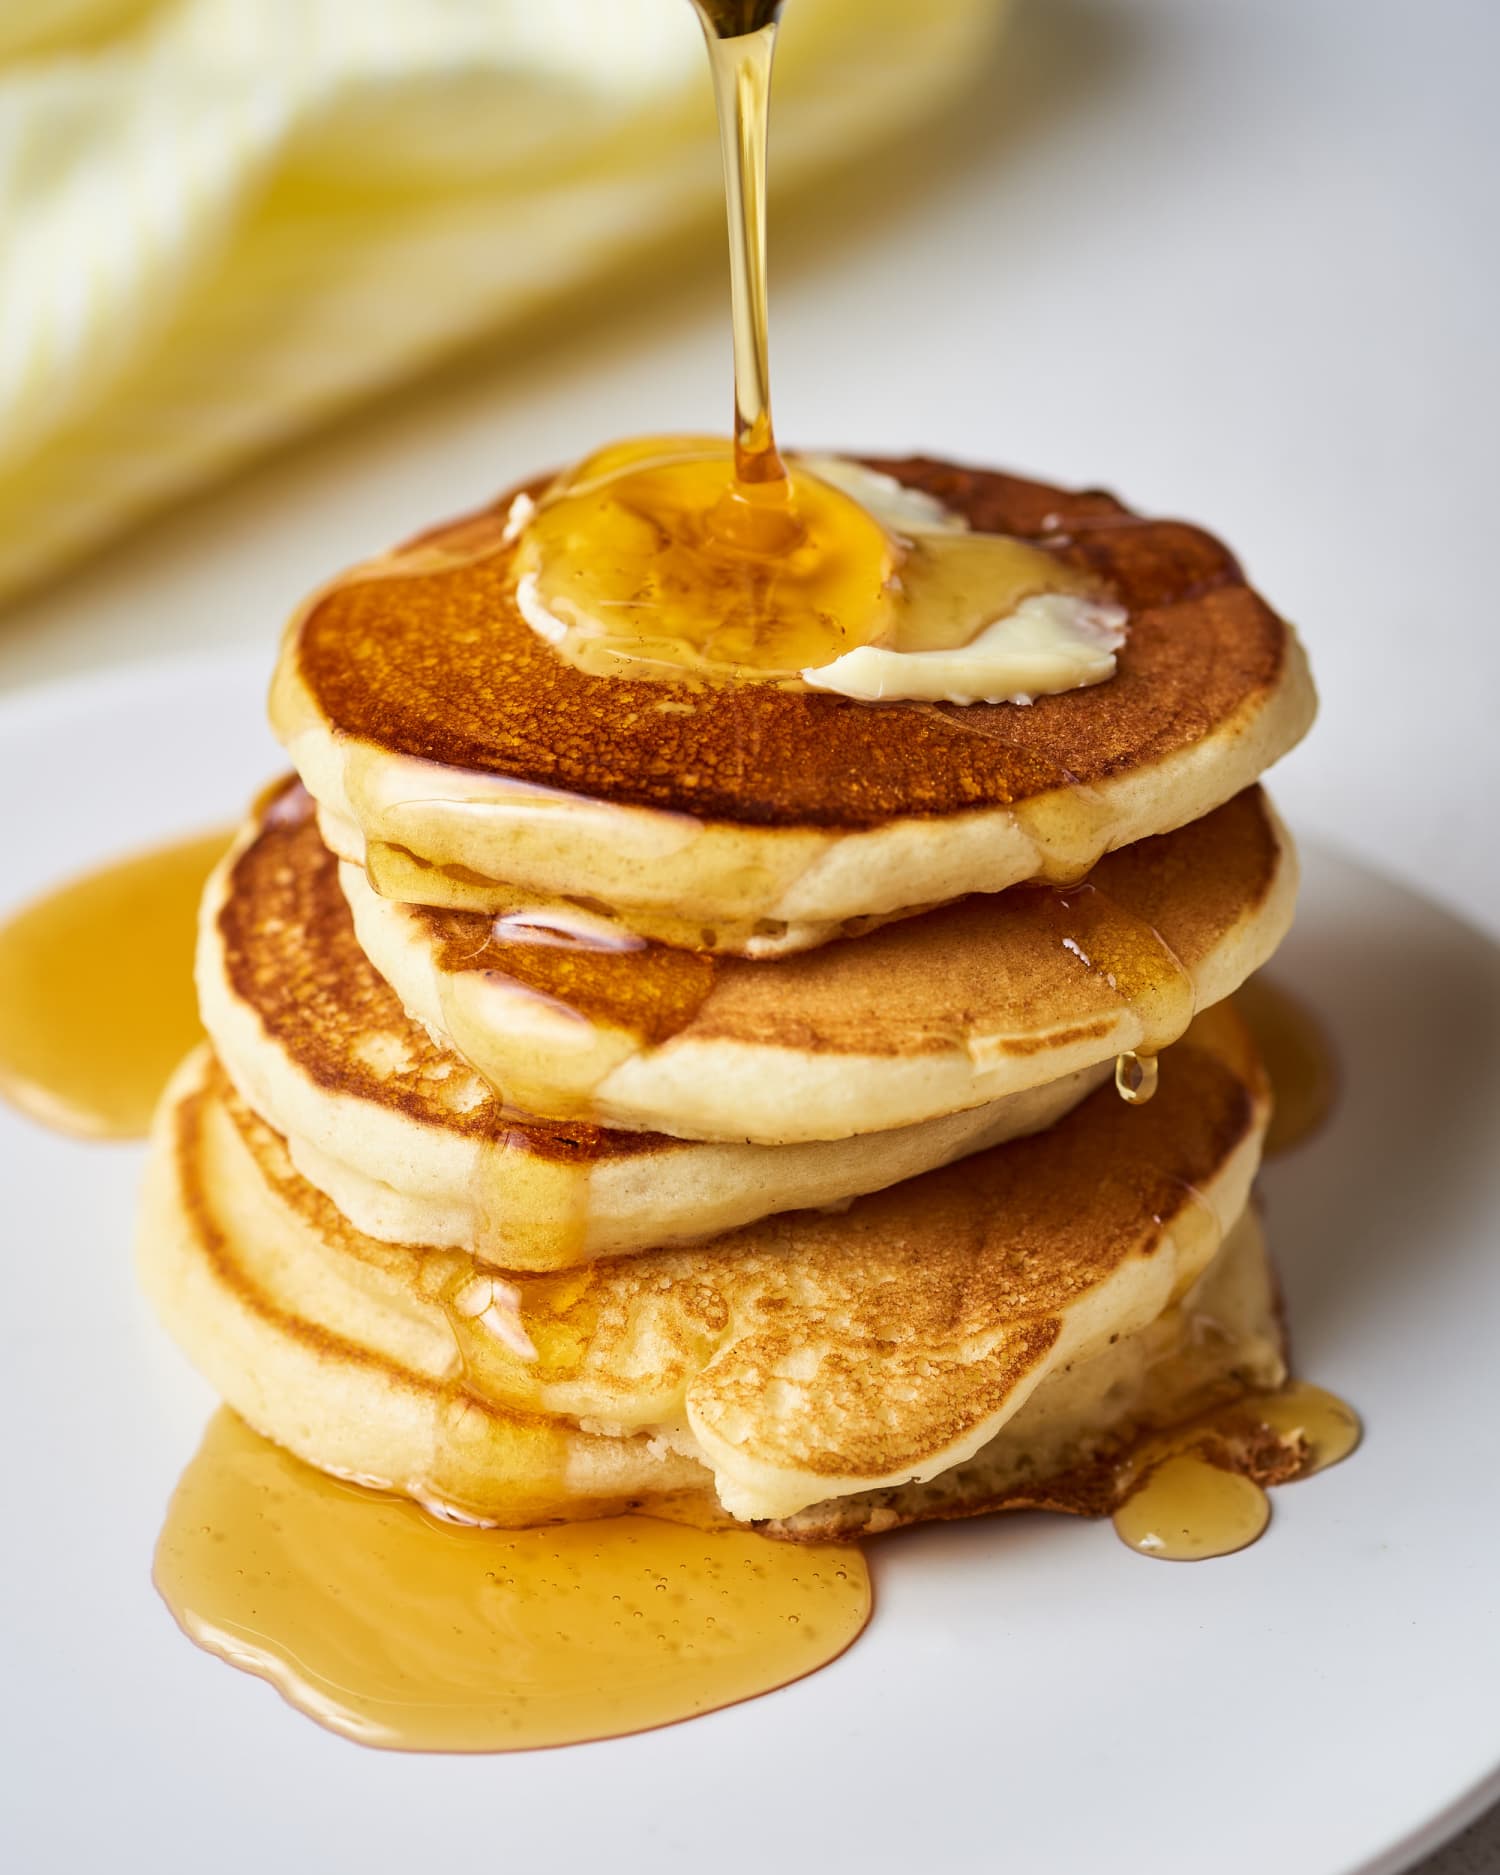 Here's how to make diner-style pancakes at home